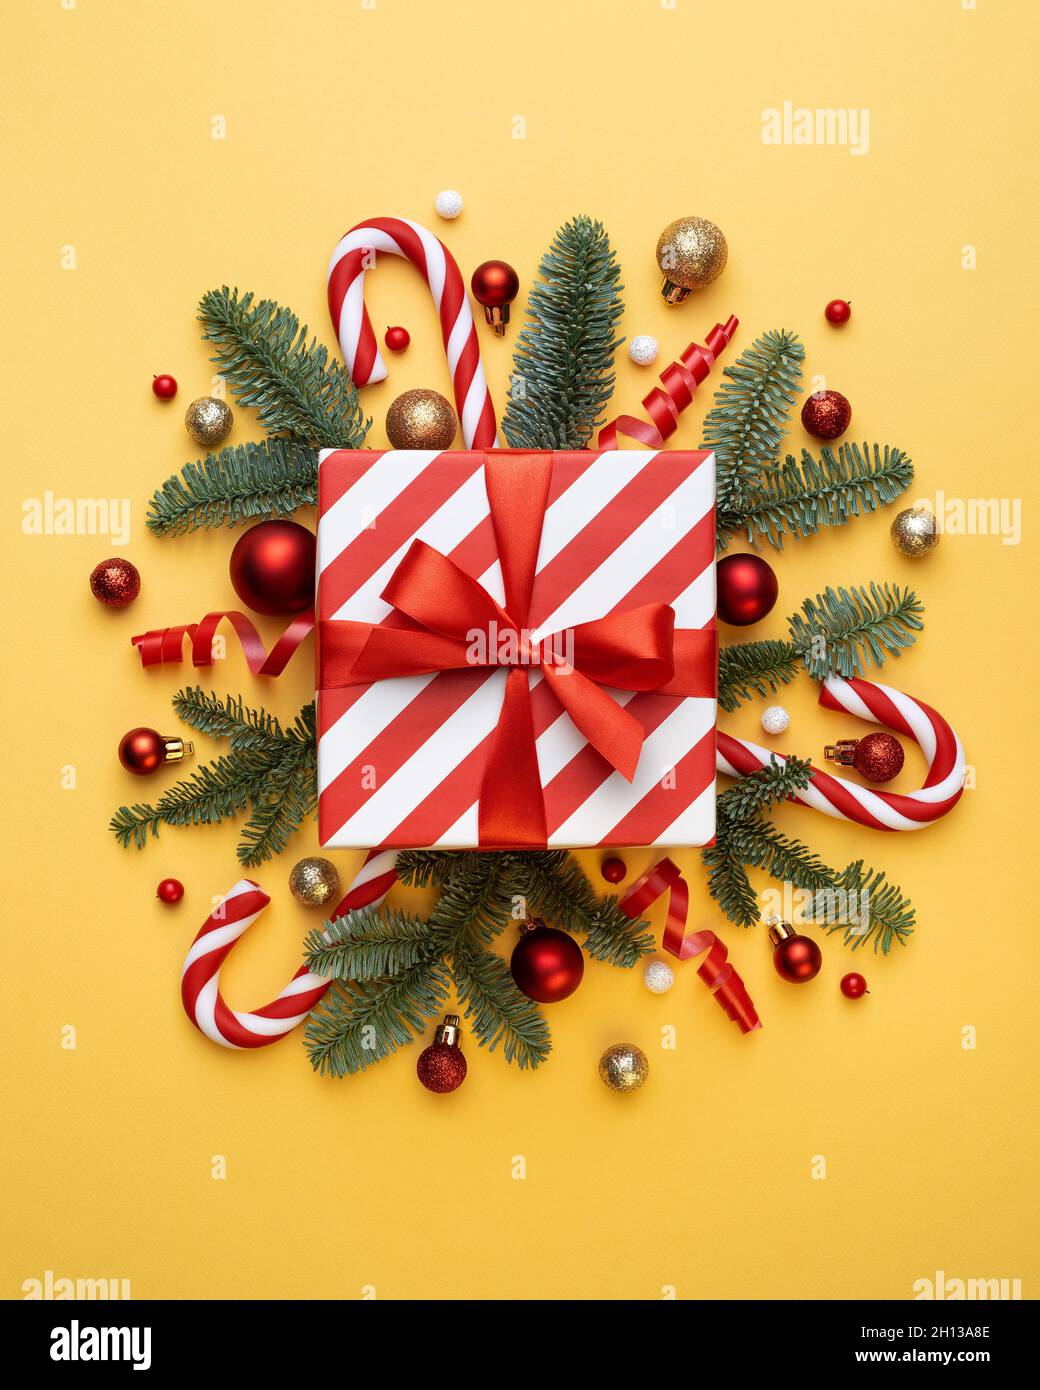 Christmas card with gift box, candy cane, Christmas balls, and fir tree branches on yellow background Stock Photo